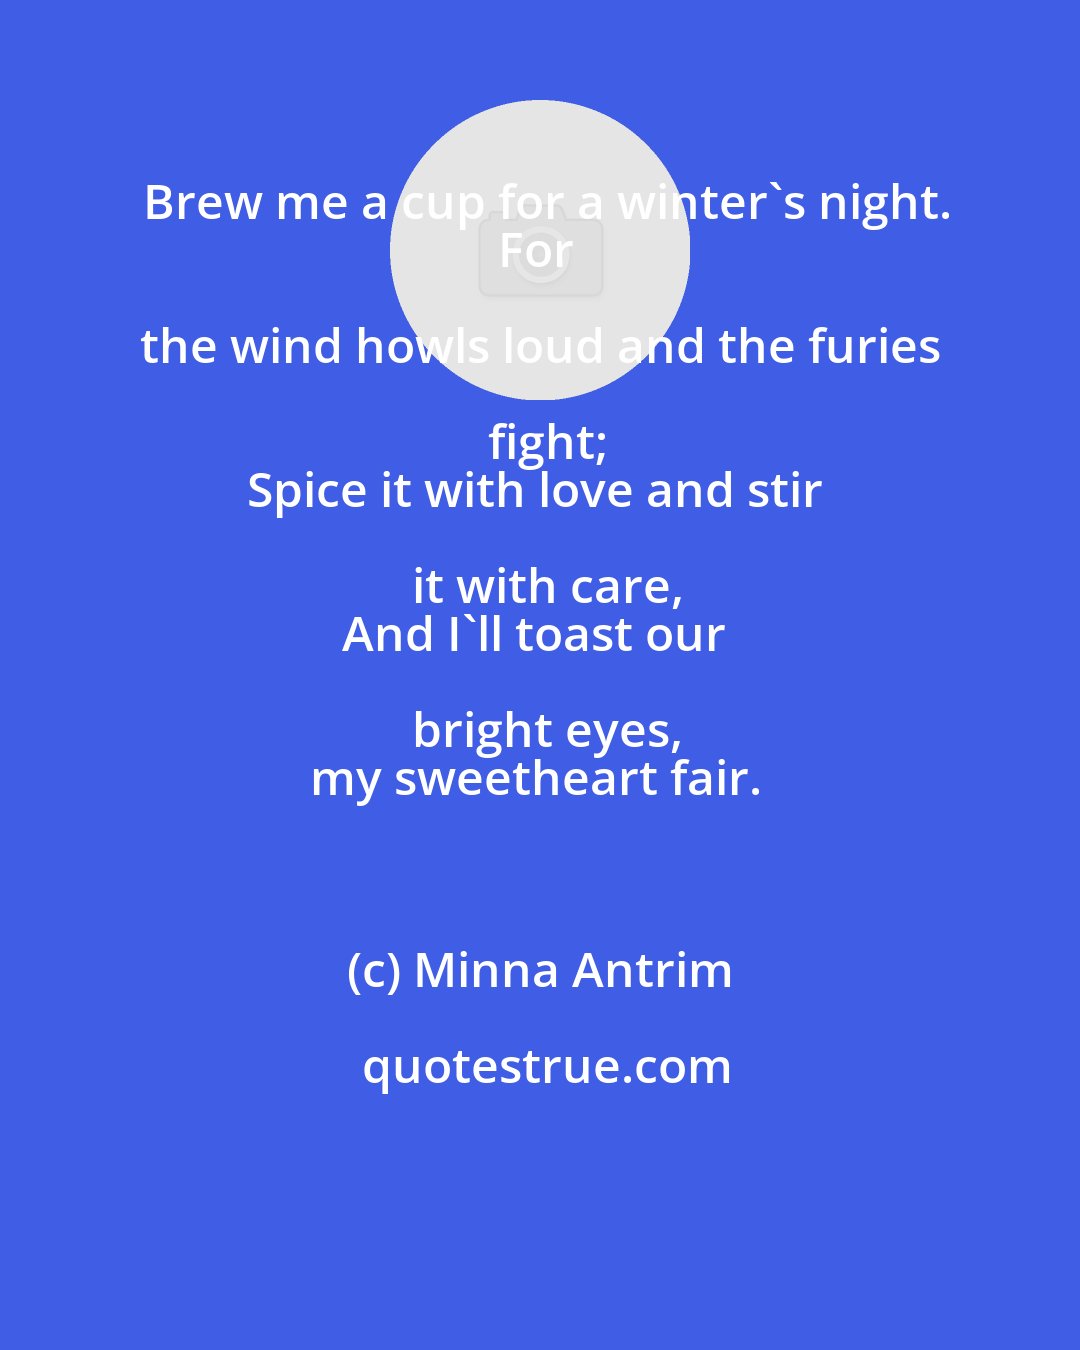 Minna Antrim: Brew me a cup for a winter's night.
For the wind howls loud and the furies fight;
Spice it with love and stir it with care,
And I'll toast our bright eyes,
my sweetheart fair.